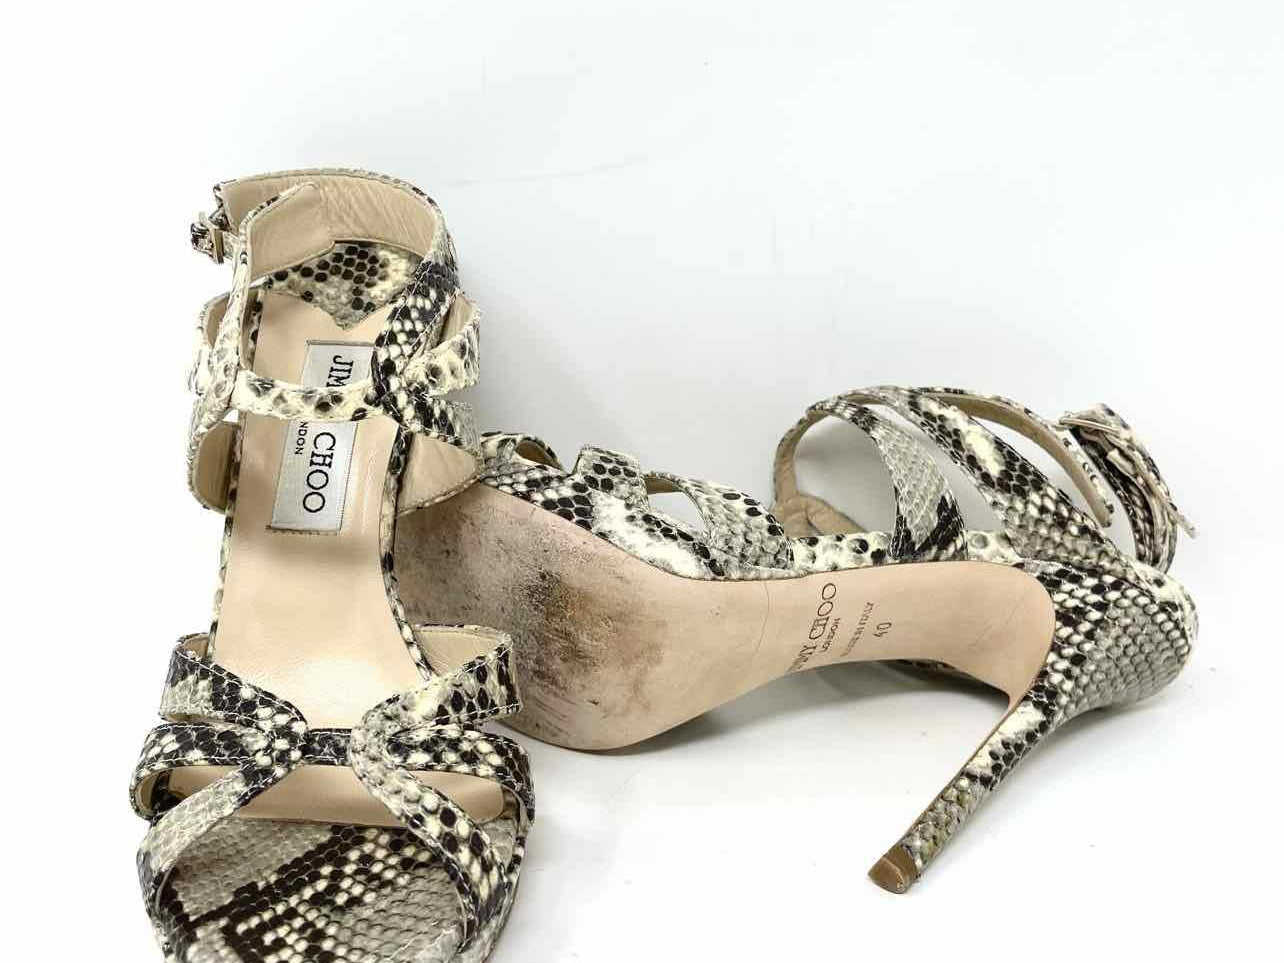 JIMMY CHOO Women's Nina Beige/Black Stiletto Snake Size 40/9 Sandals - Article Consignment